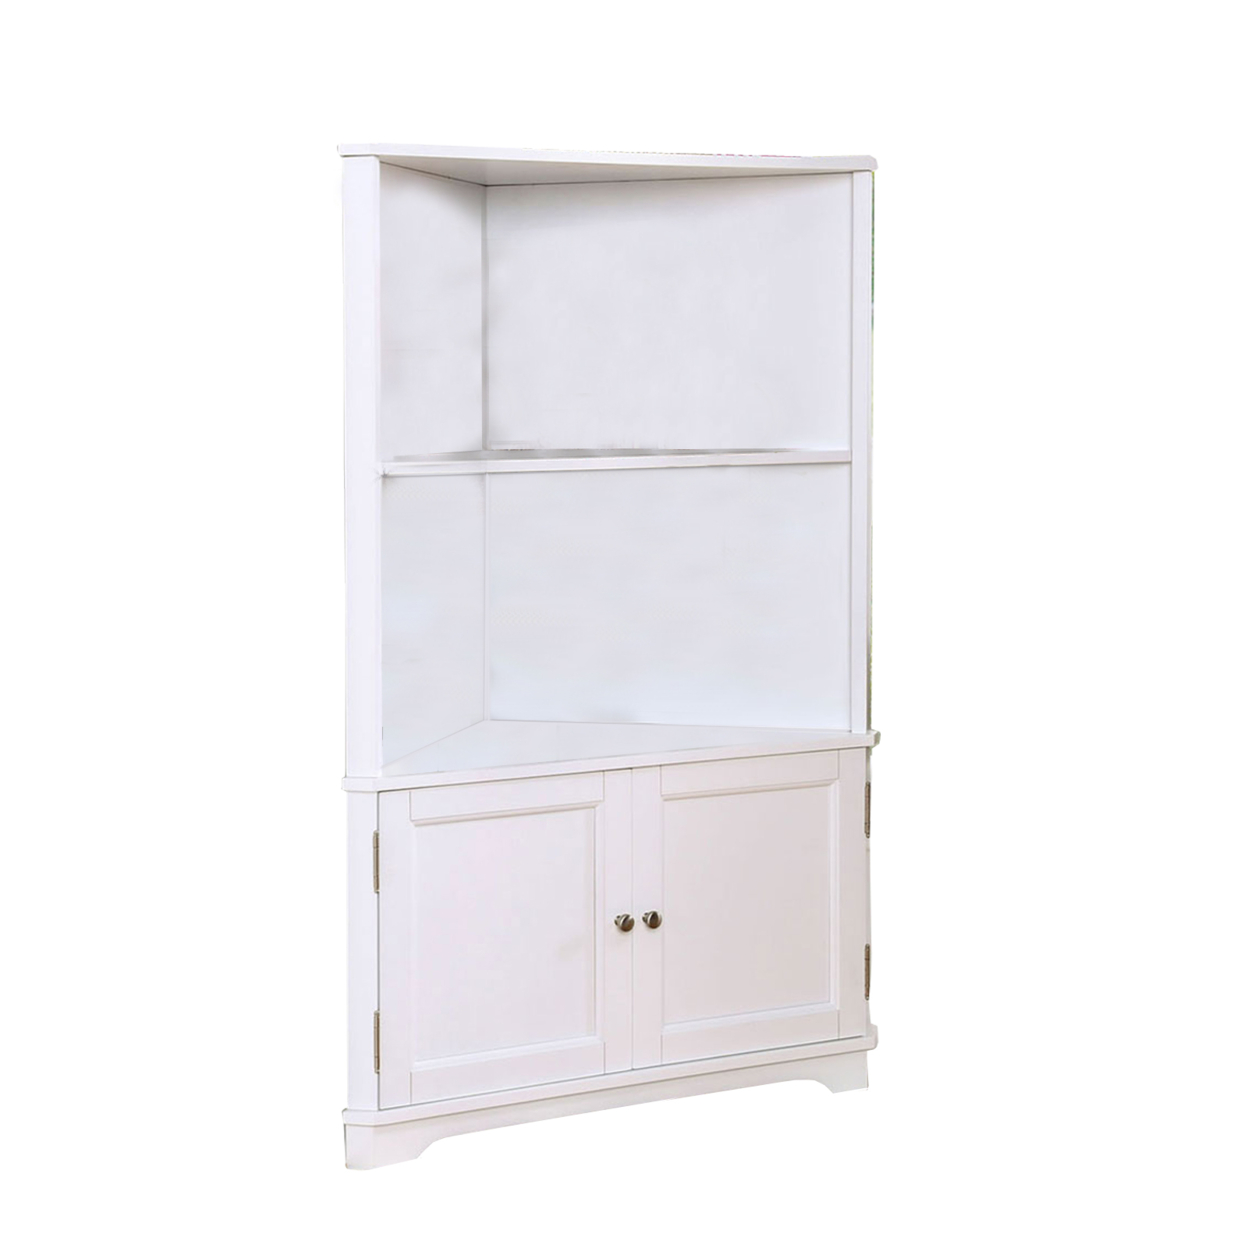 Wooden Bookshelf With 2 Open Compartments And 2 Doors, White- Saltoro Sherpi